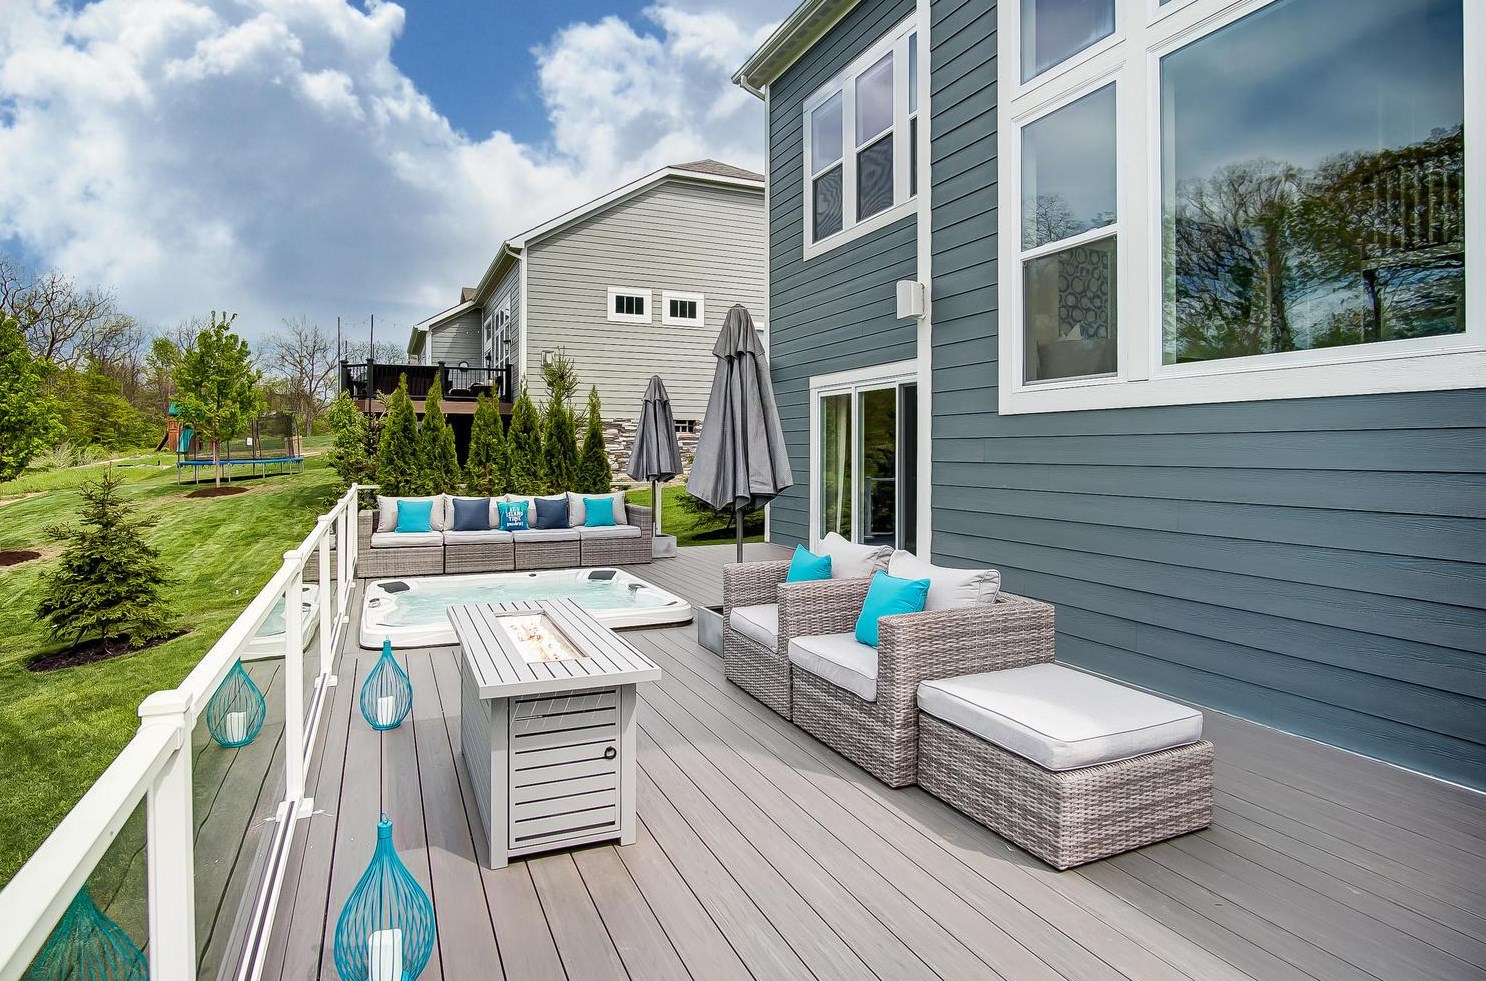 Deck with recessed jacuzzi and seating